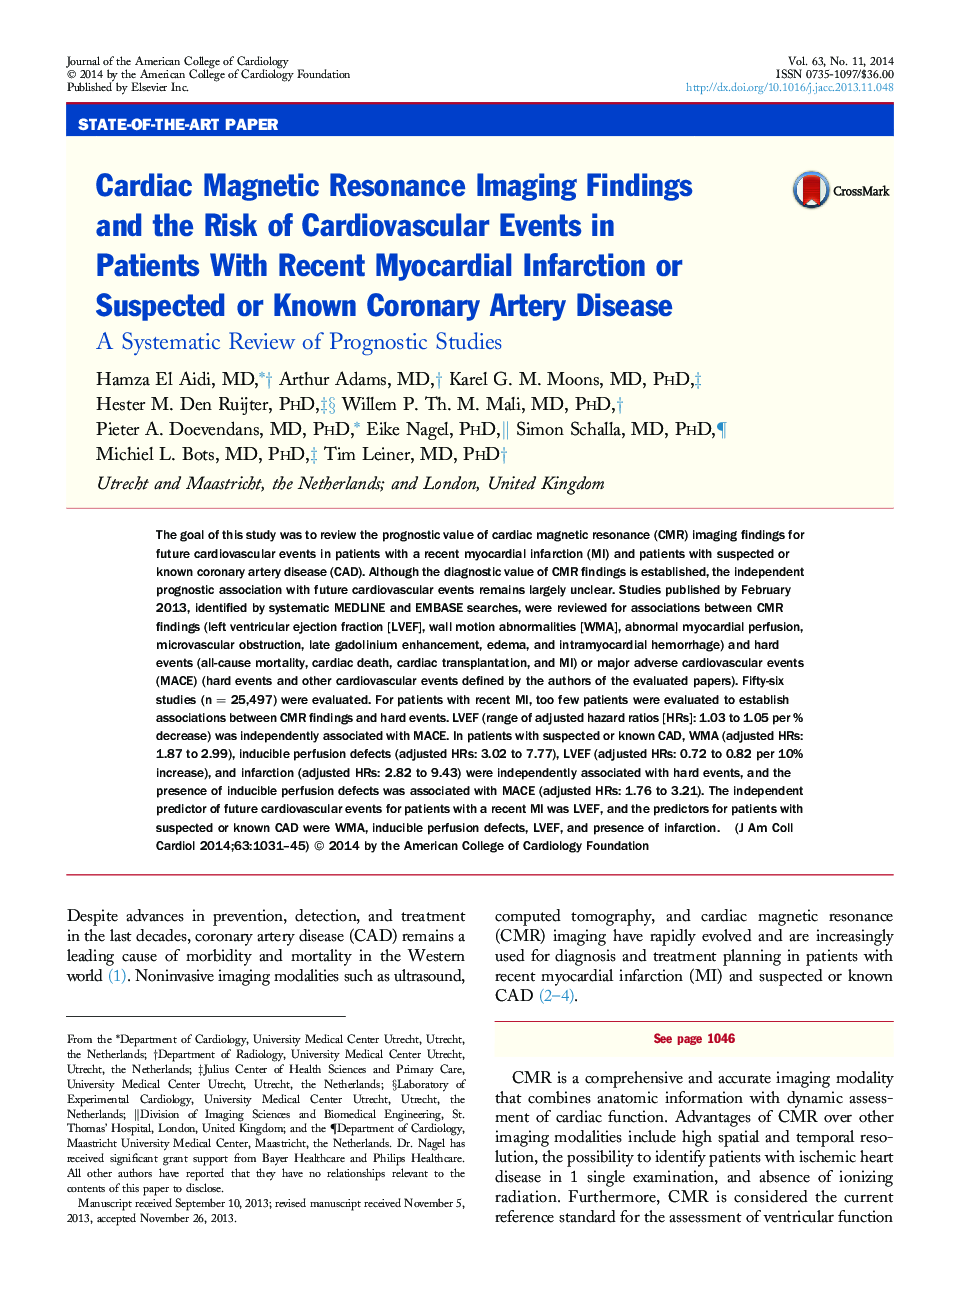 Cardiac Magnetic Resonance Imaging Findings and the Risk of Cardiovascular Events in Patients With Recent Myocardial Infarction or Suspected or Known Coronary Artery Disease : A Systematic Review of Prognostic Studies